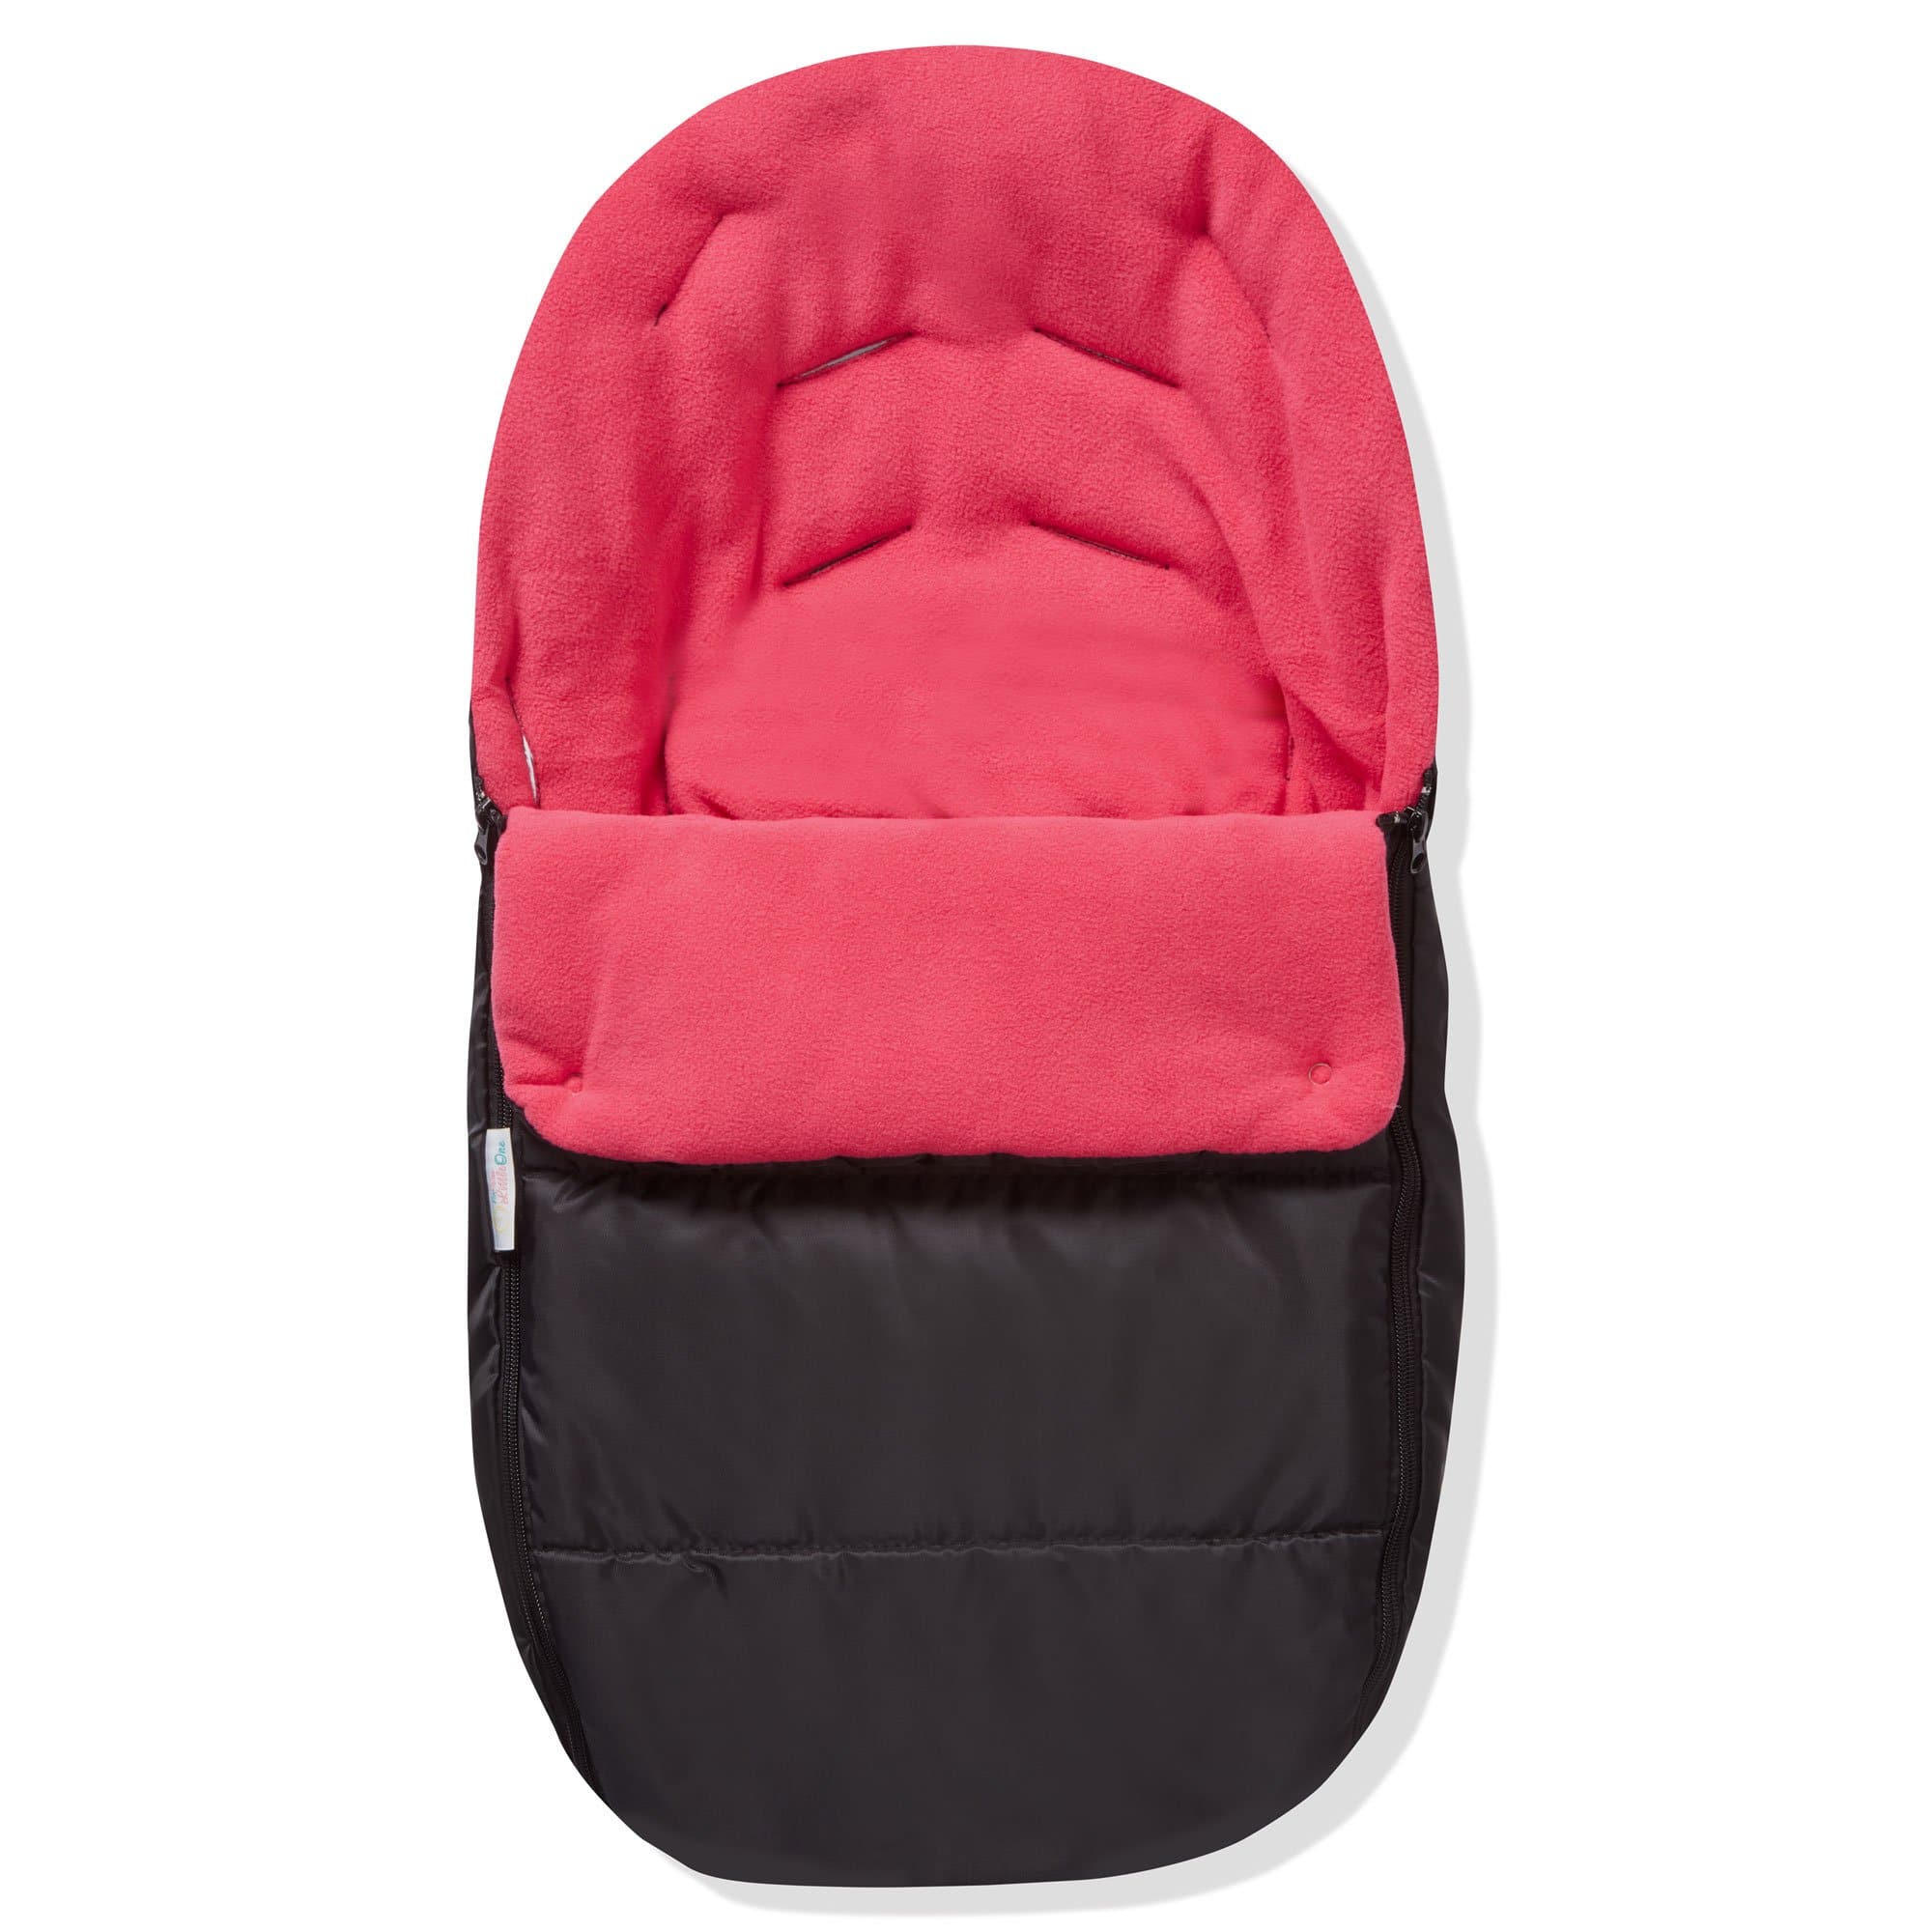 Premium Car Seat Footmuff / Cosy Toes Compatible with My Child - Pink Rose / Fits All Models | For Your Little One